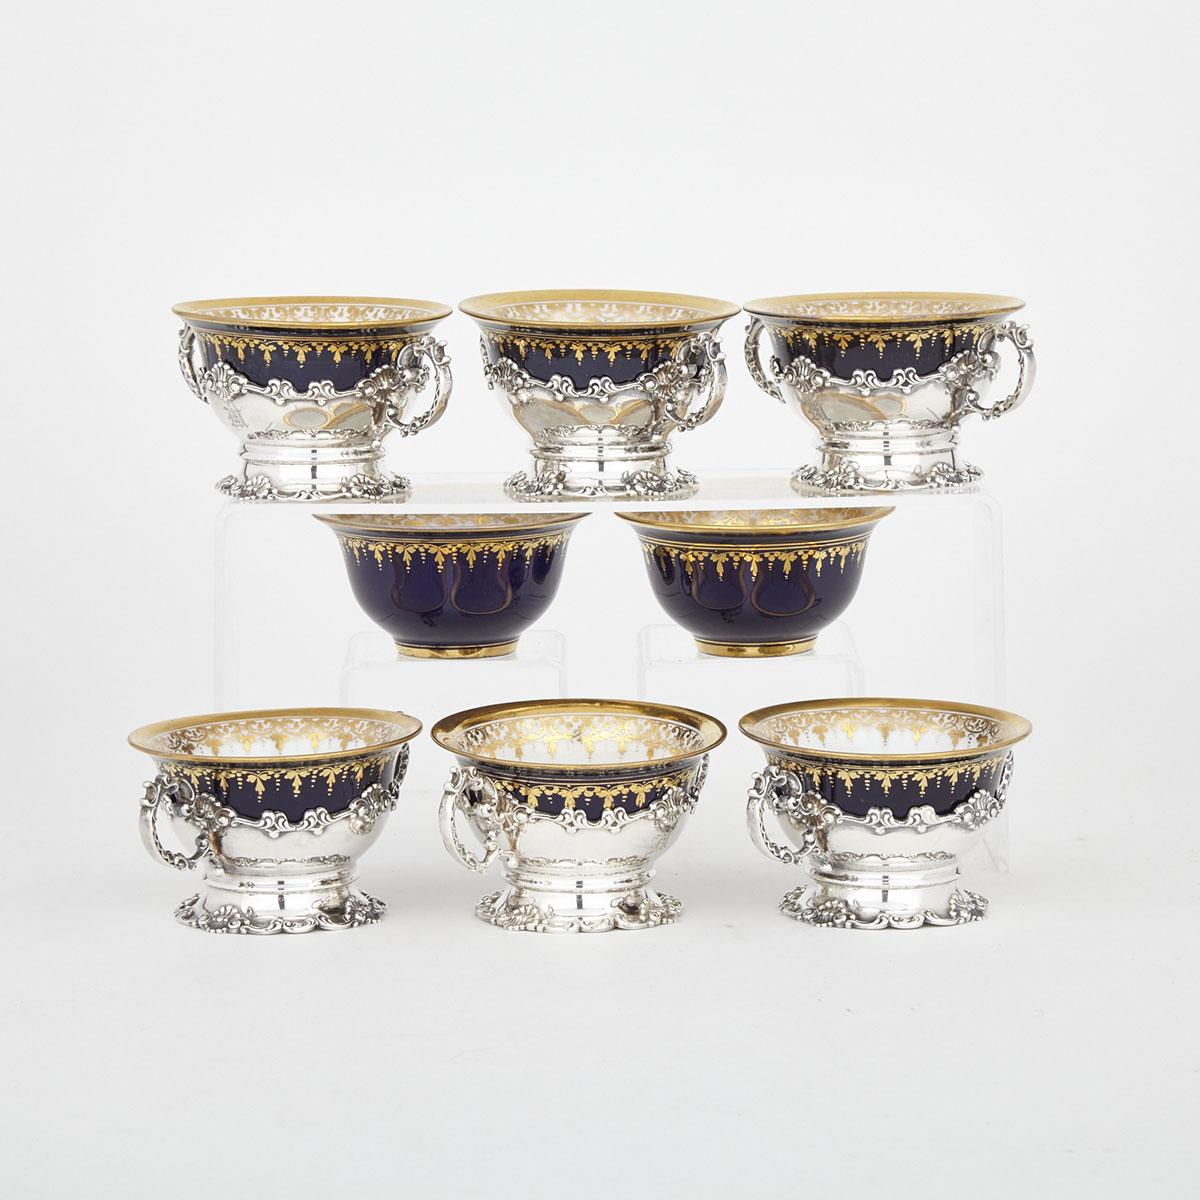 Six Canadian Silver Two-Handled Dessert Cup Frames, Henry Birks & Sons, Montreal, Que. with Eight Dresden Liners, 20th century